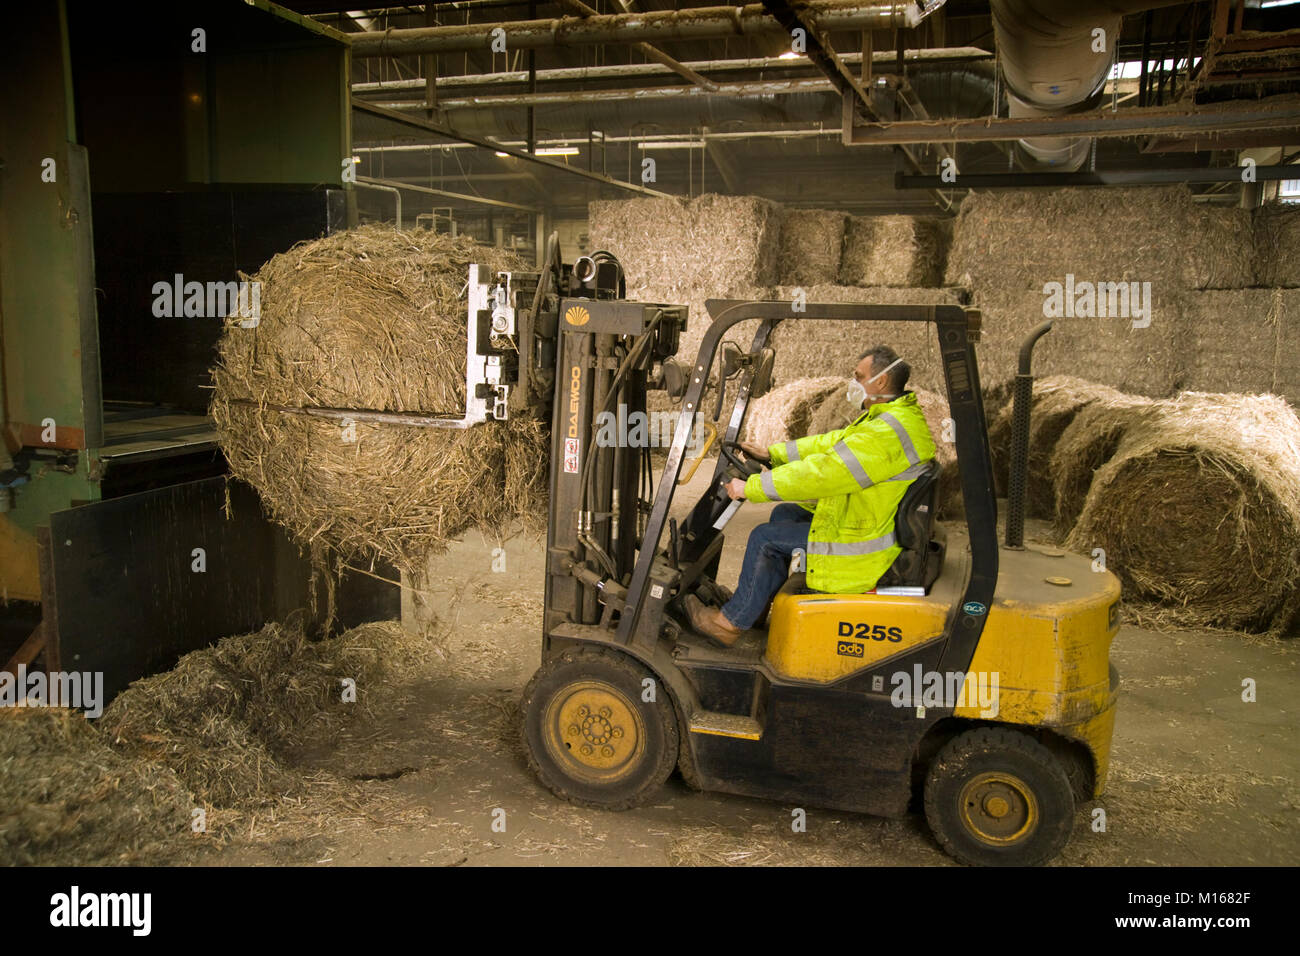 Worker in industrial hemp processing plant loads bales of hemp straw onto a wagon for delivery to conversion facility for further processing. Stock Photo